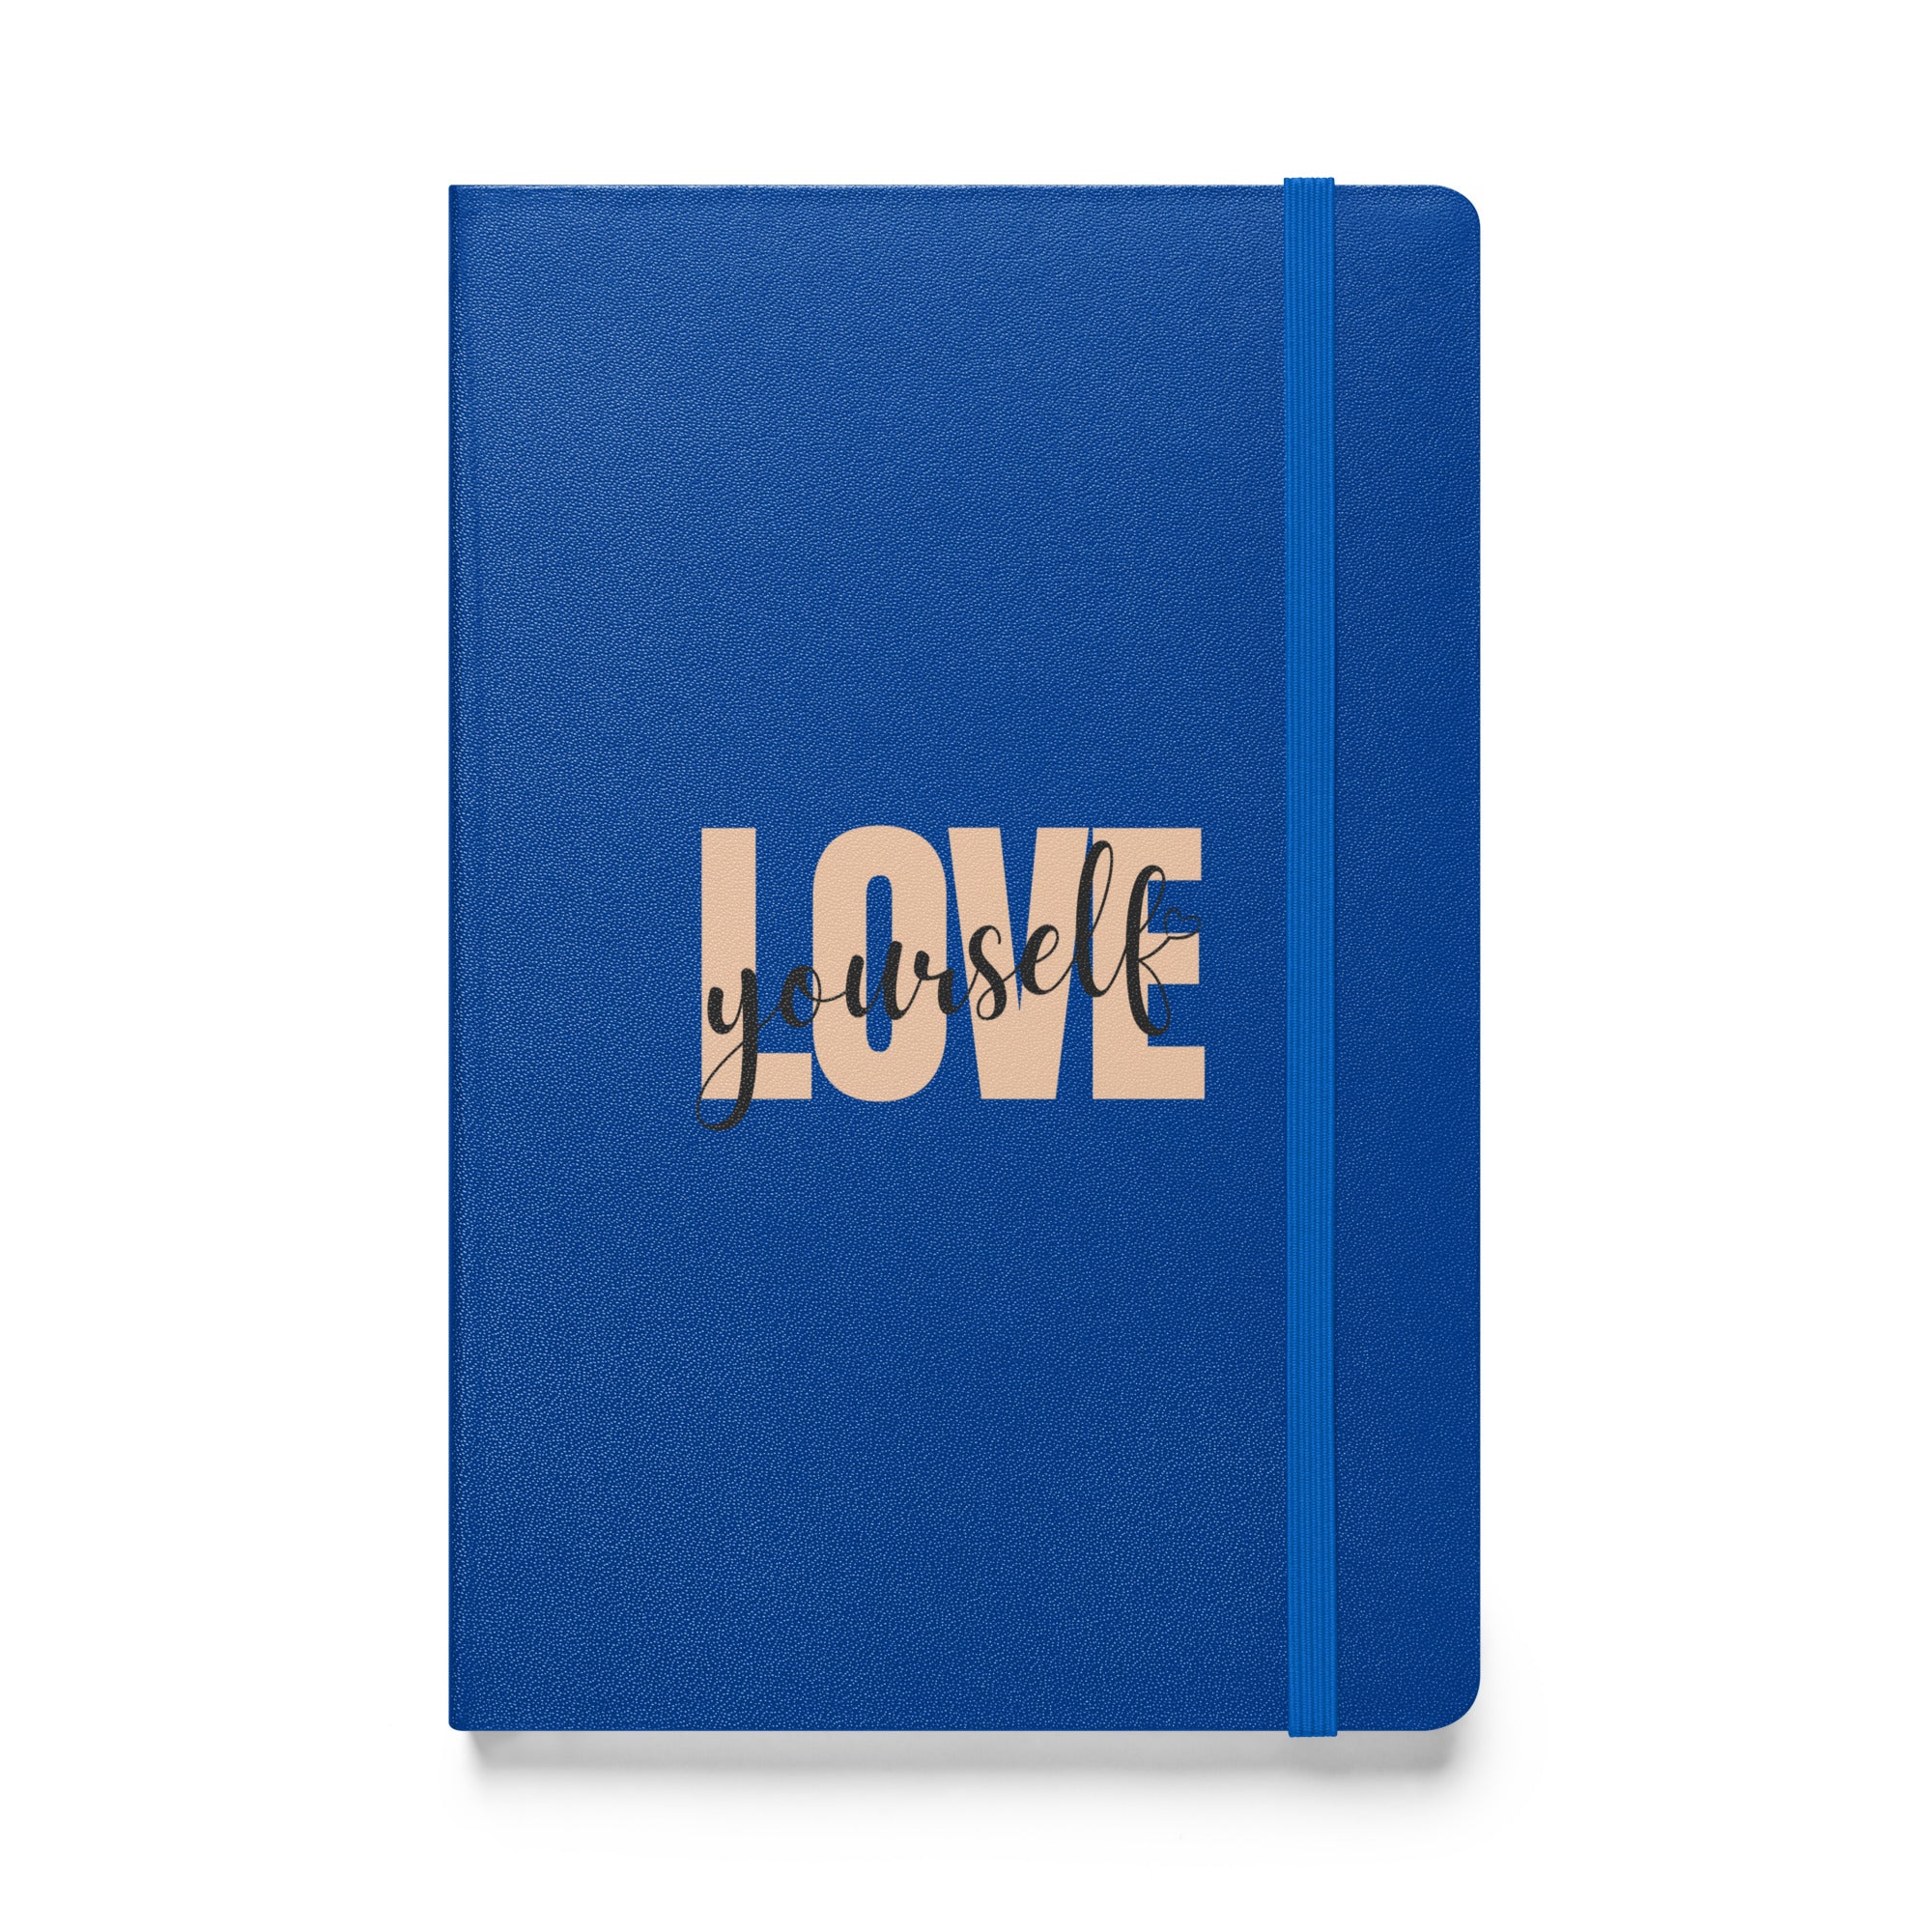 Love Yourself Hardcover bound notebook